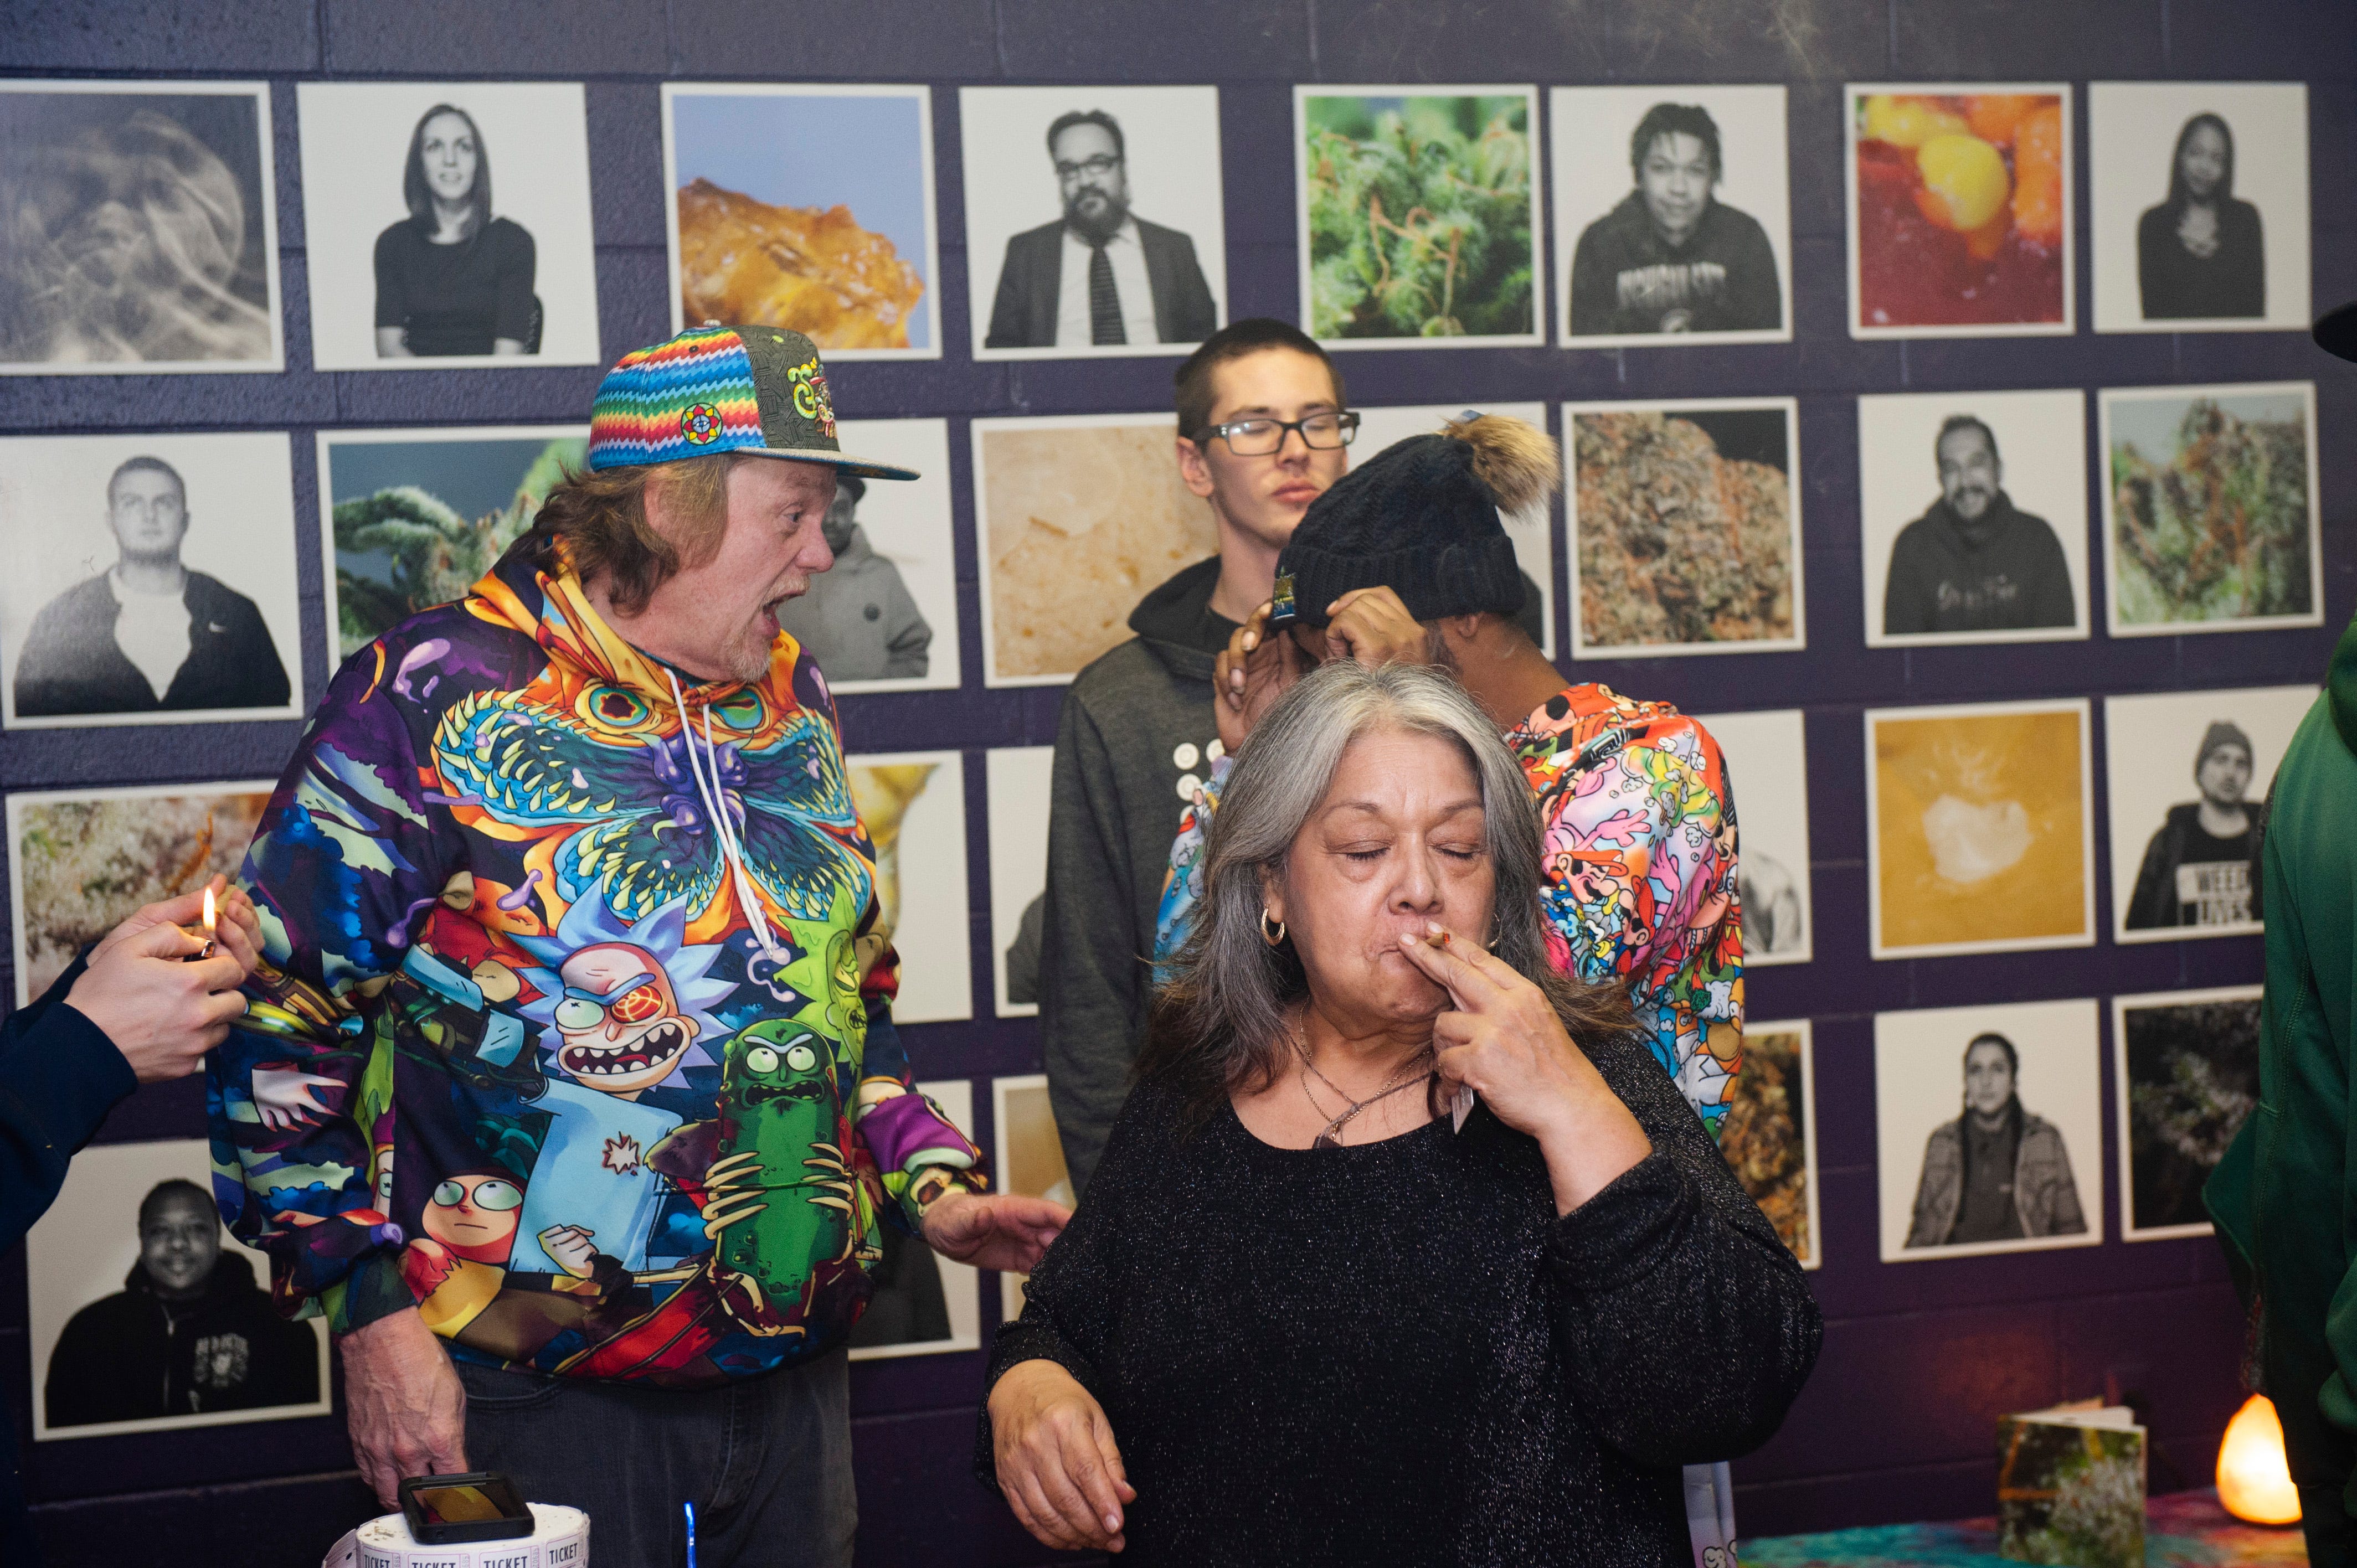 Joanne Diaz, 65, of Flint takes a hit during "The Art of Cannabis" event at the Cannabis Counsel in Detroit on Saturday, Dec. 22, 2018. Diaz said she's smoked marijuana since she was 15 years old.